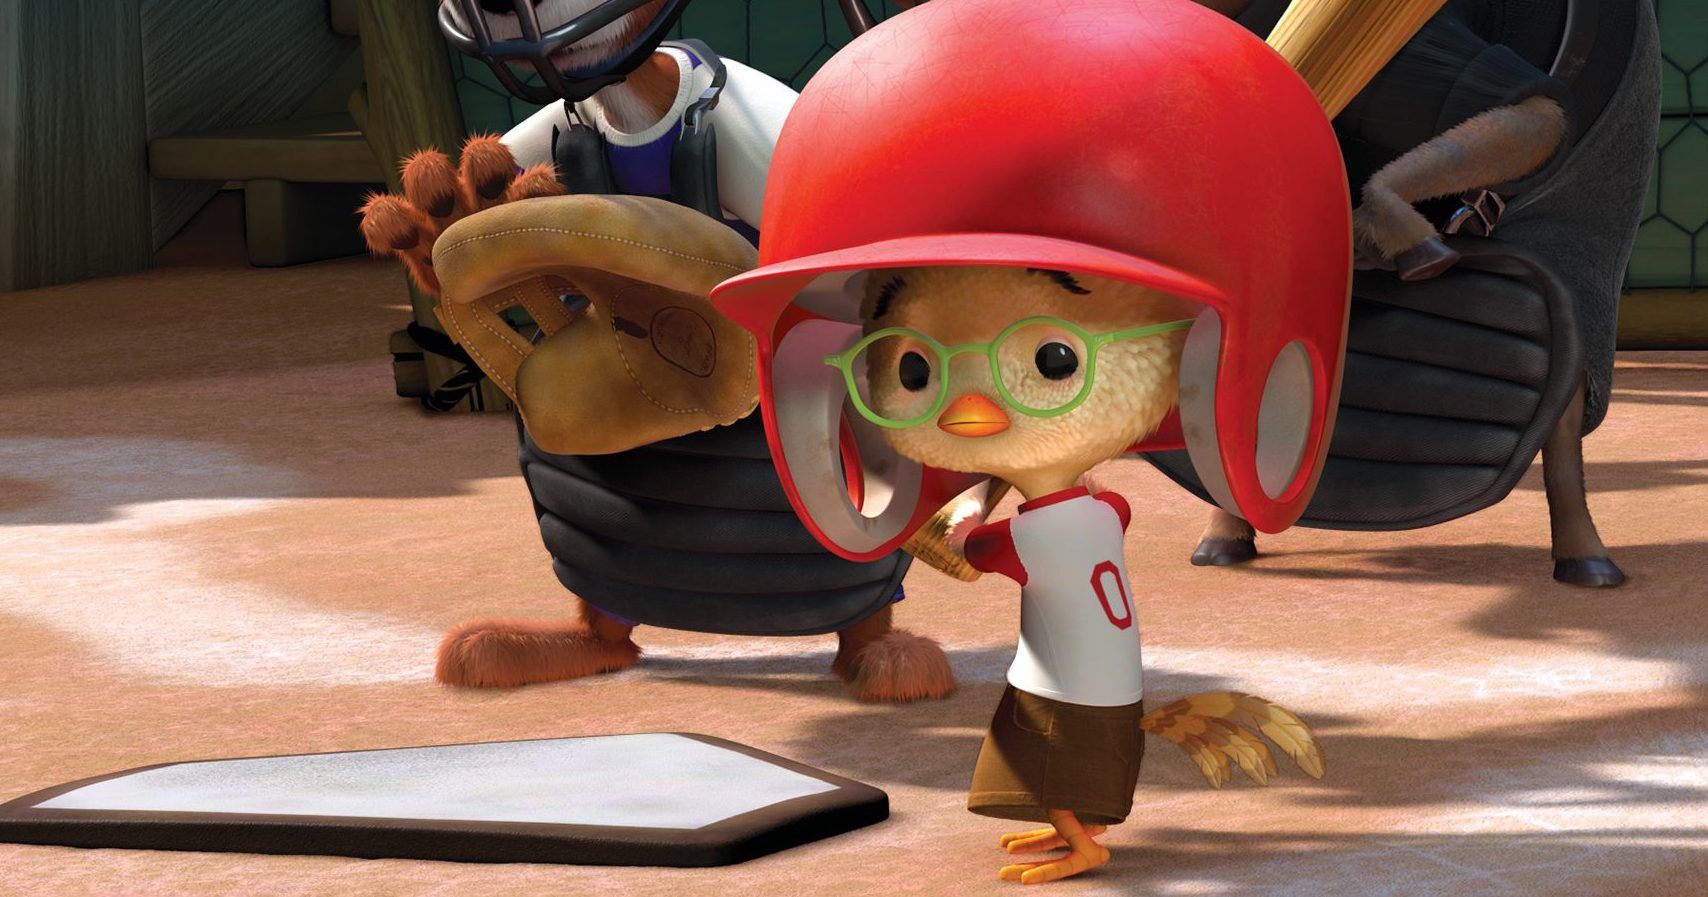 An image of Chicken Little playing baseball